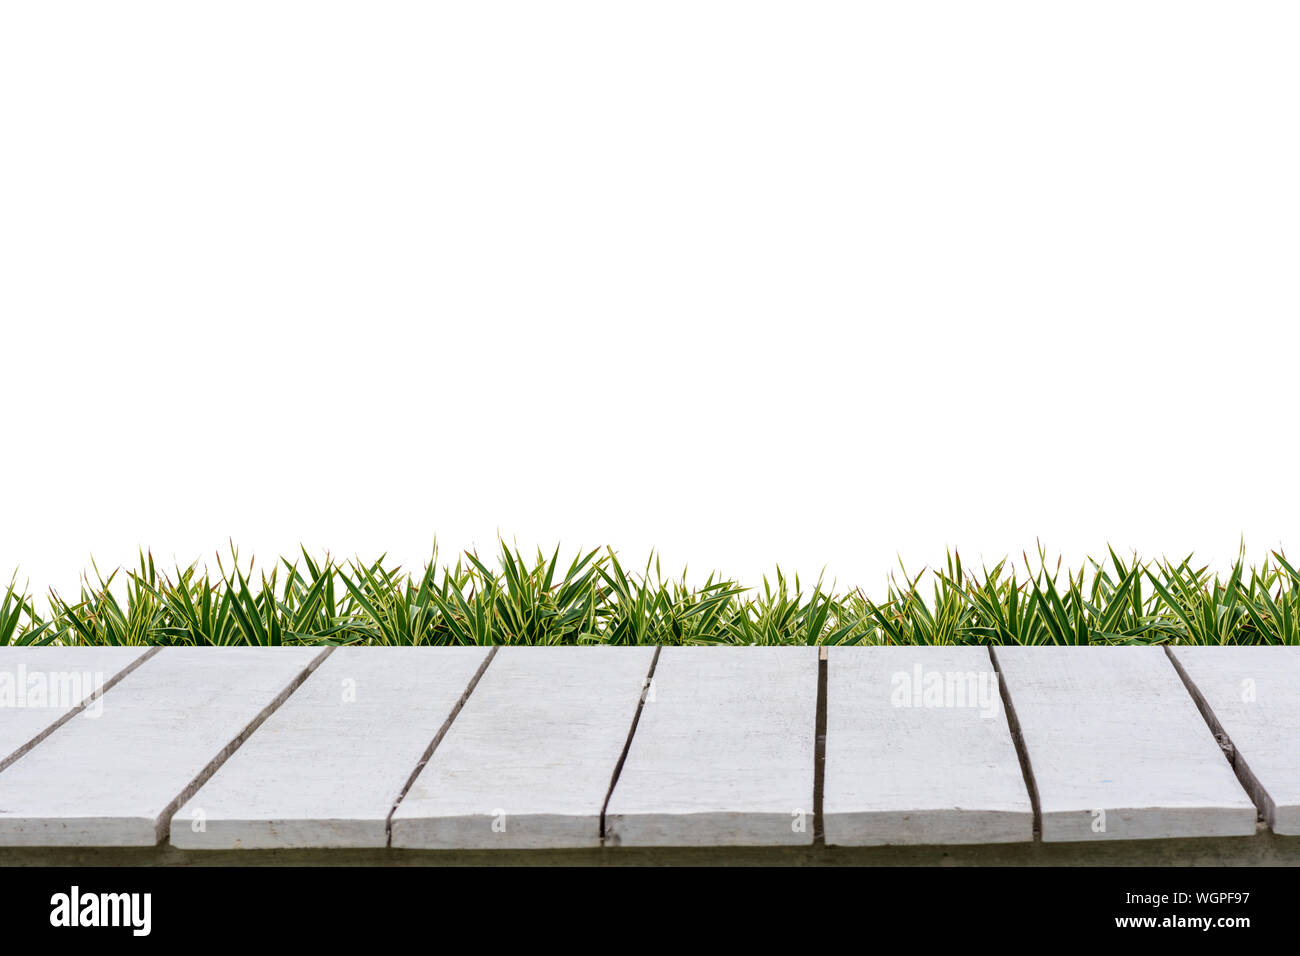 Close-up Of Board Walk By Grass Against White Background Stock Photo